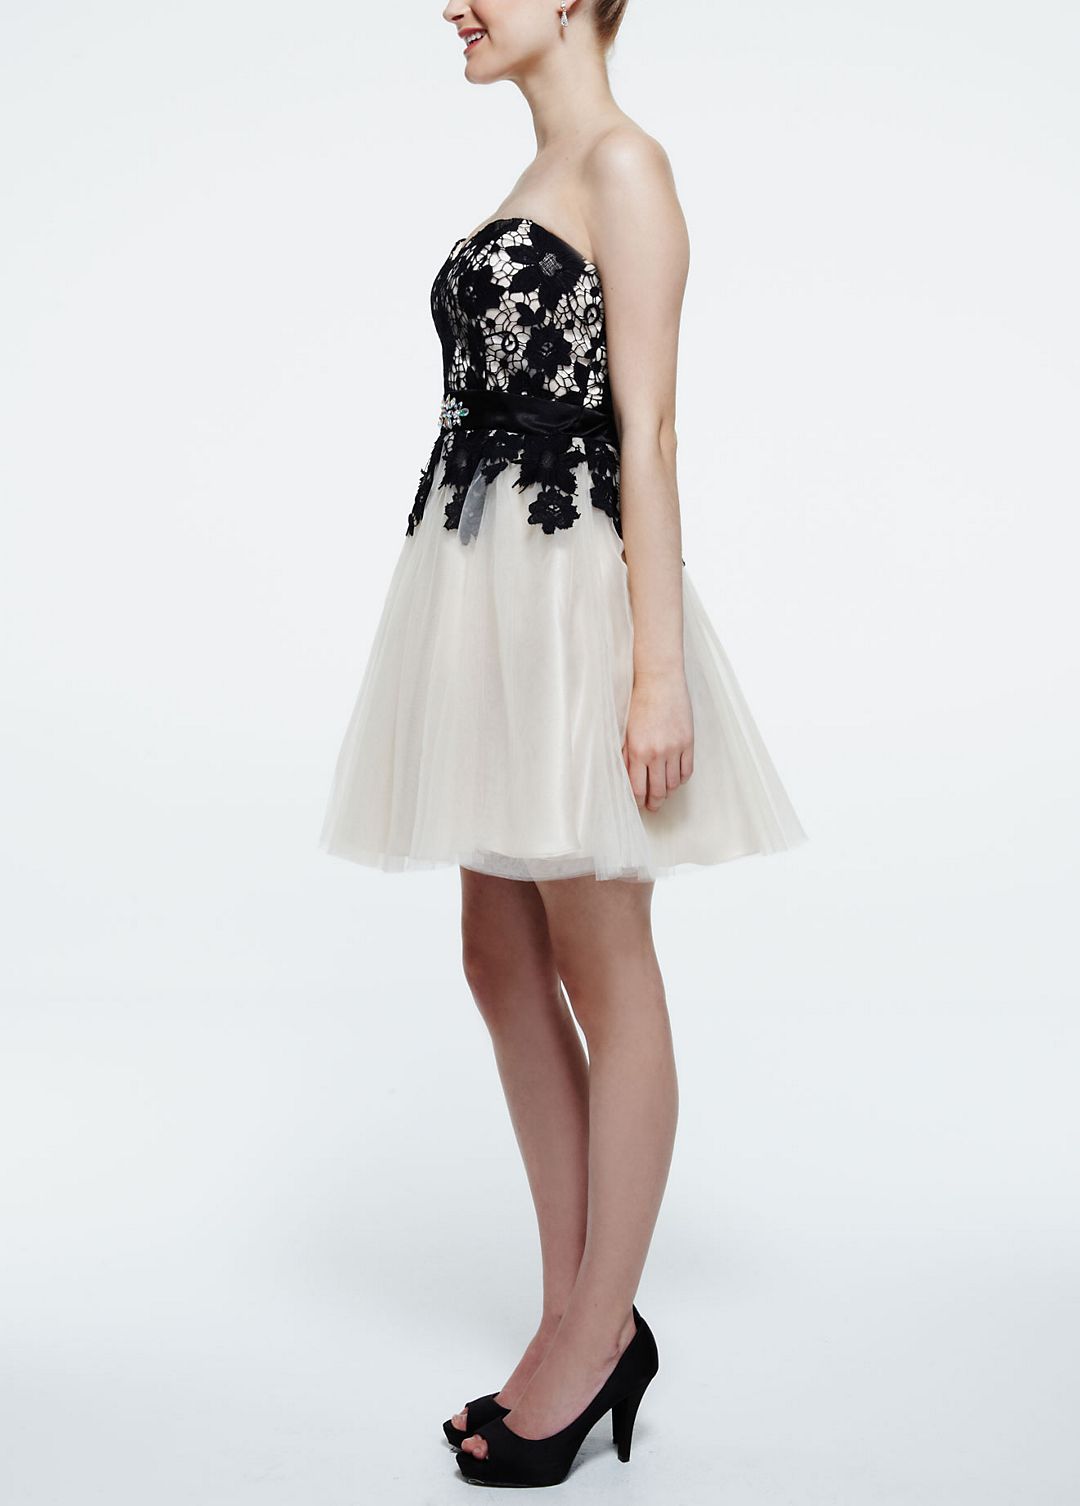 Strapless Lace Applique Tulle Dress with Belt Image 3